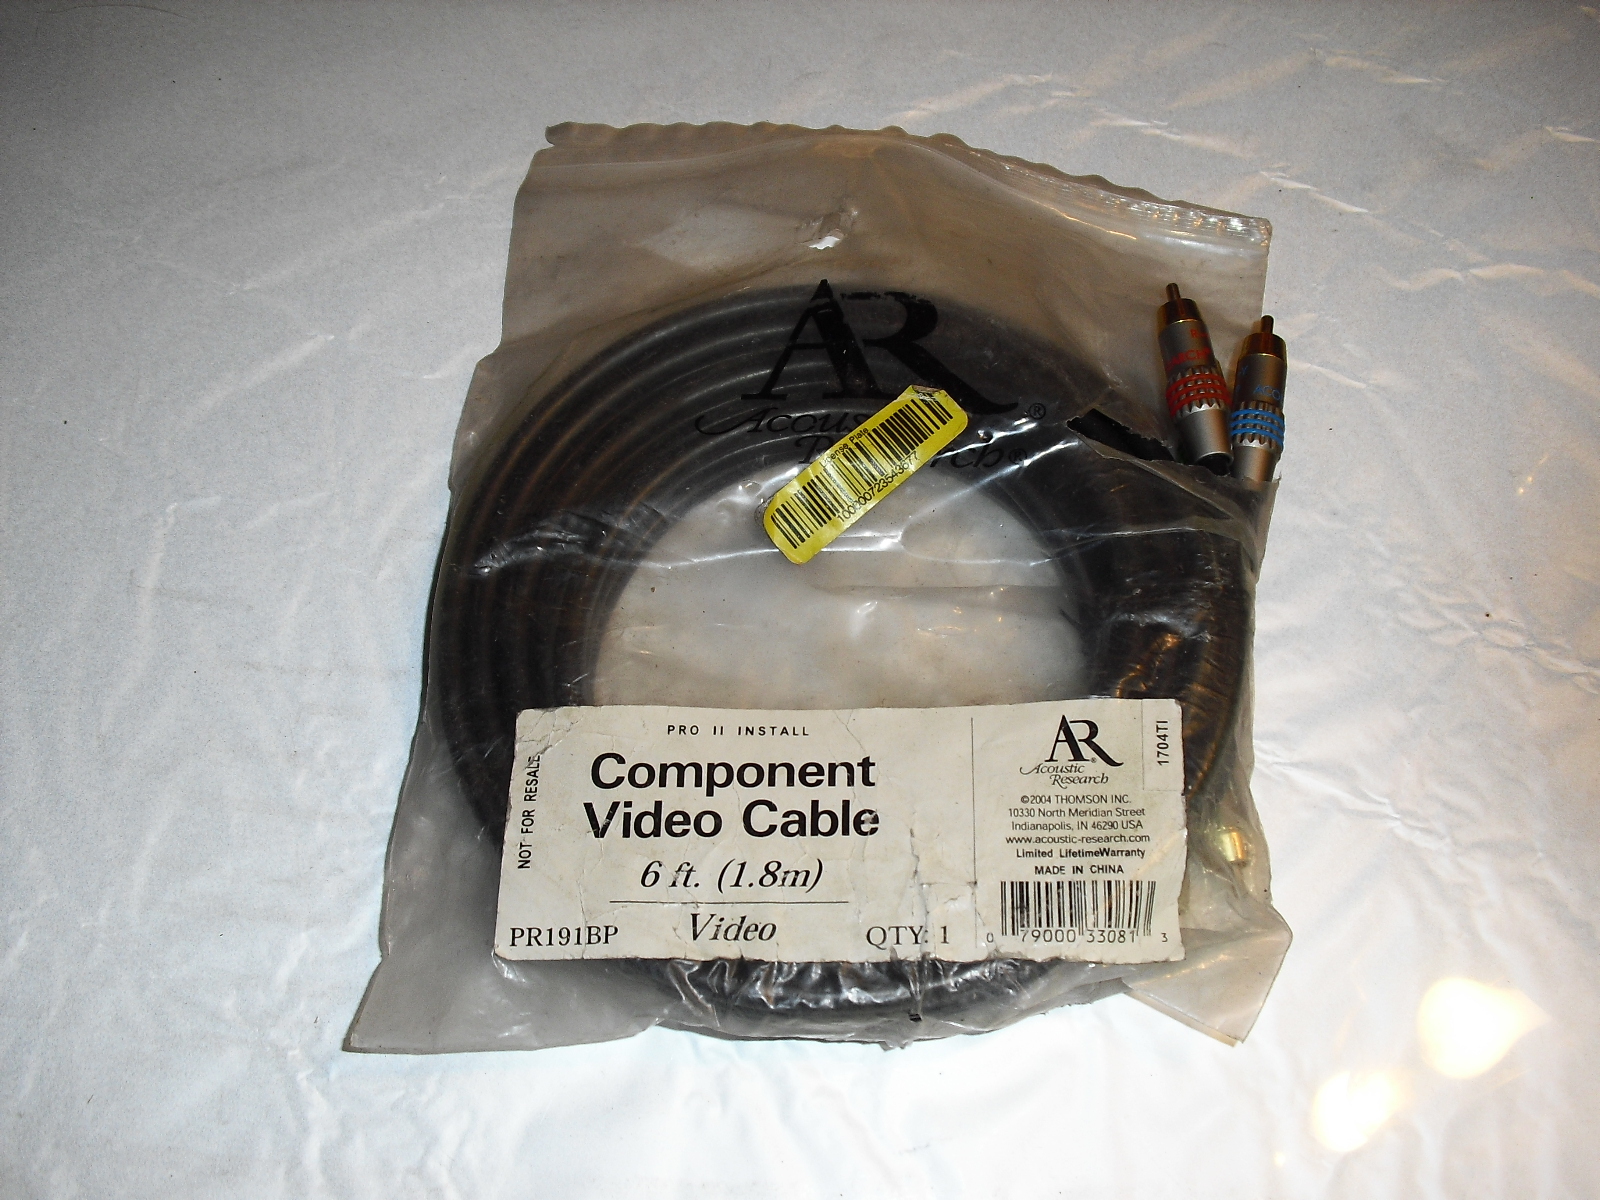 Primary image for ar acustics  research  component  video  cable pr191bp  6 ft    1.8 m